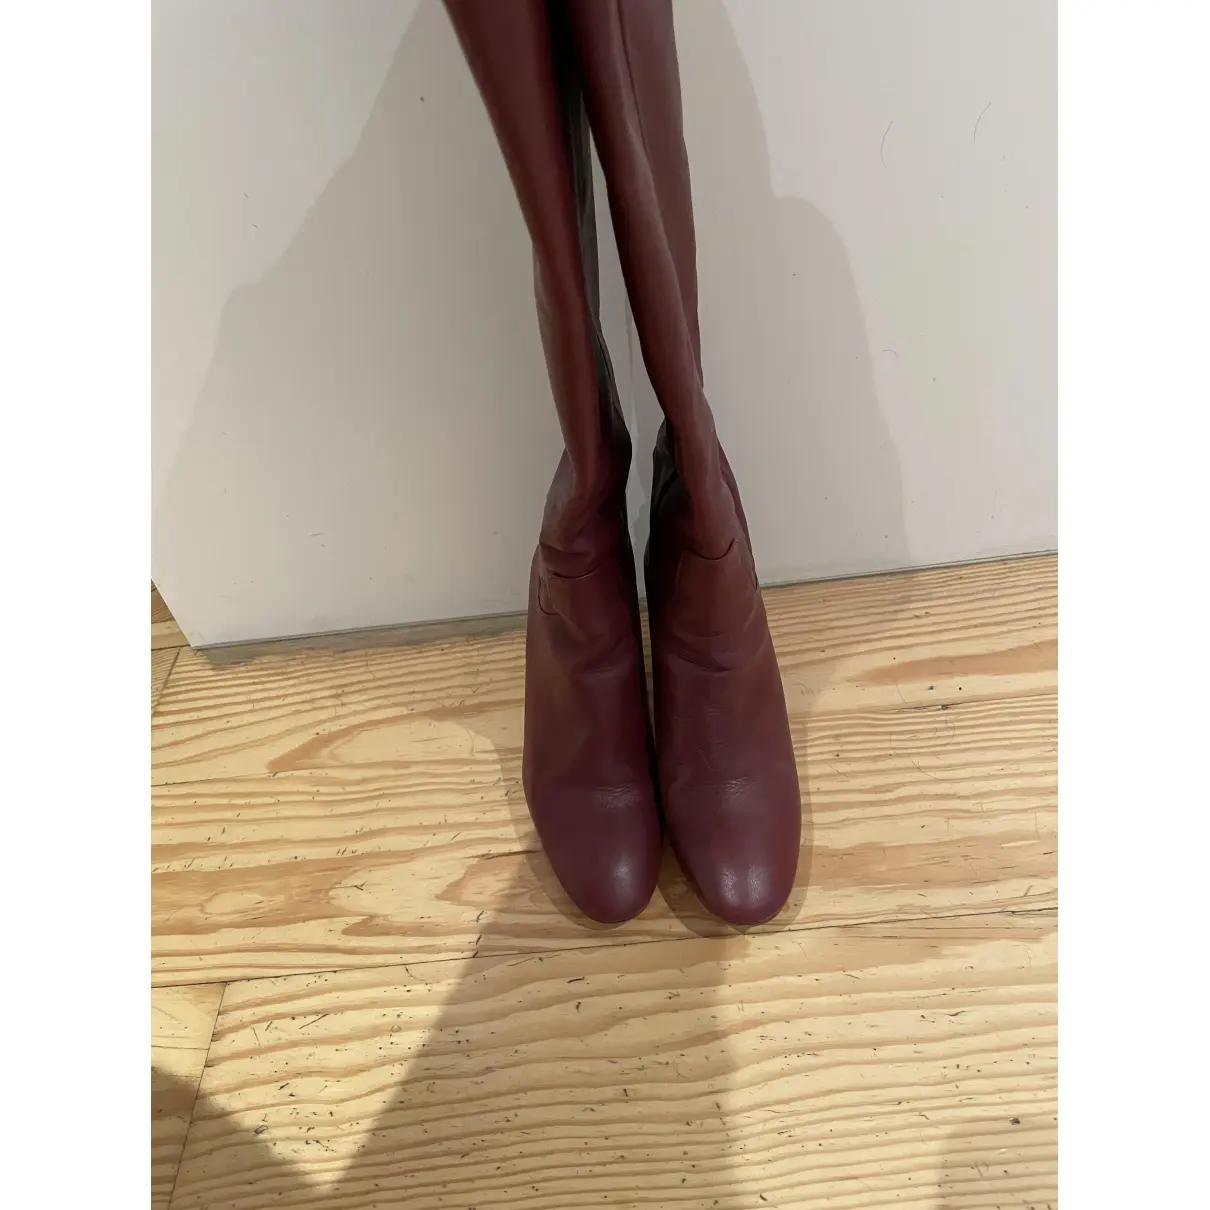 Buy Zara Leather riding boots online